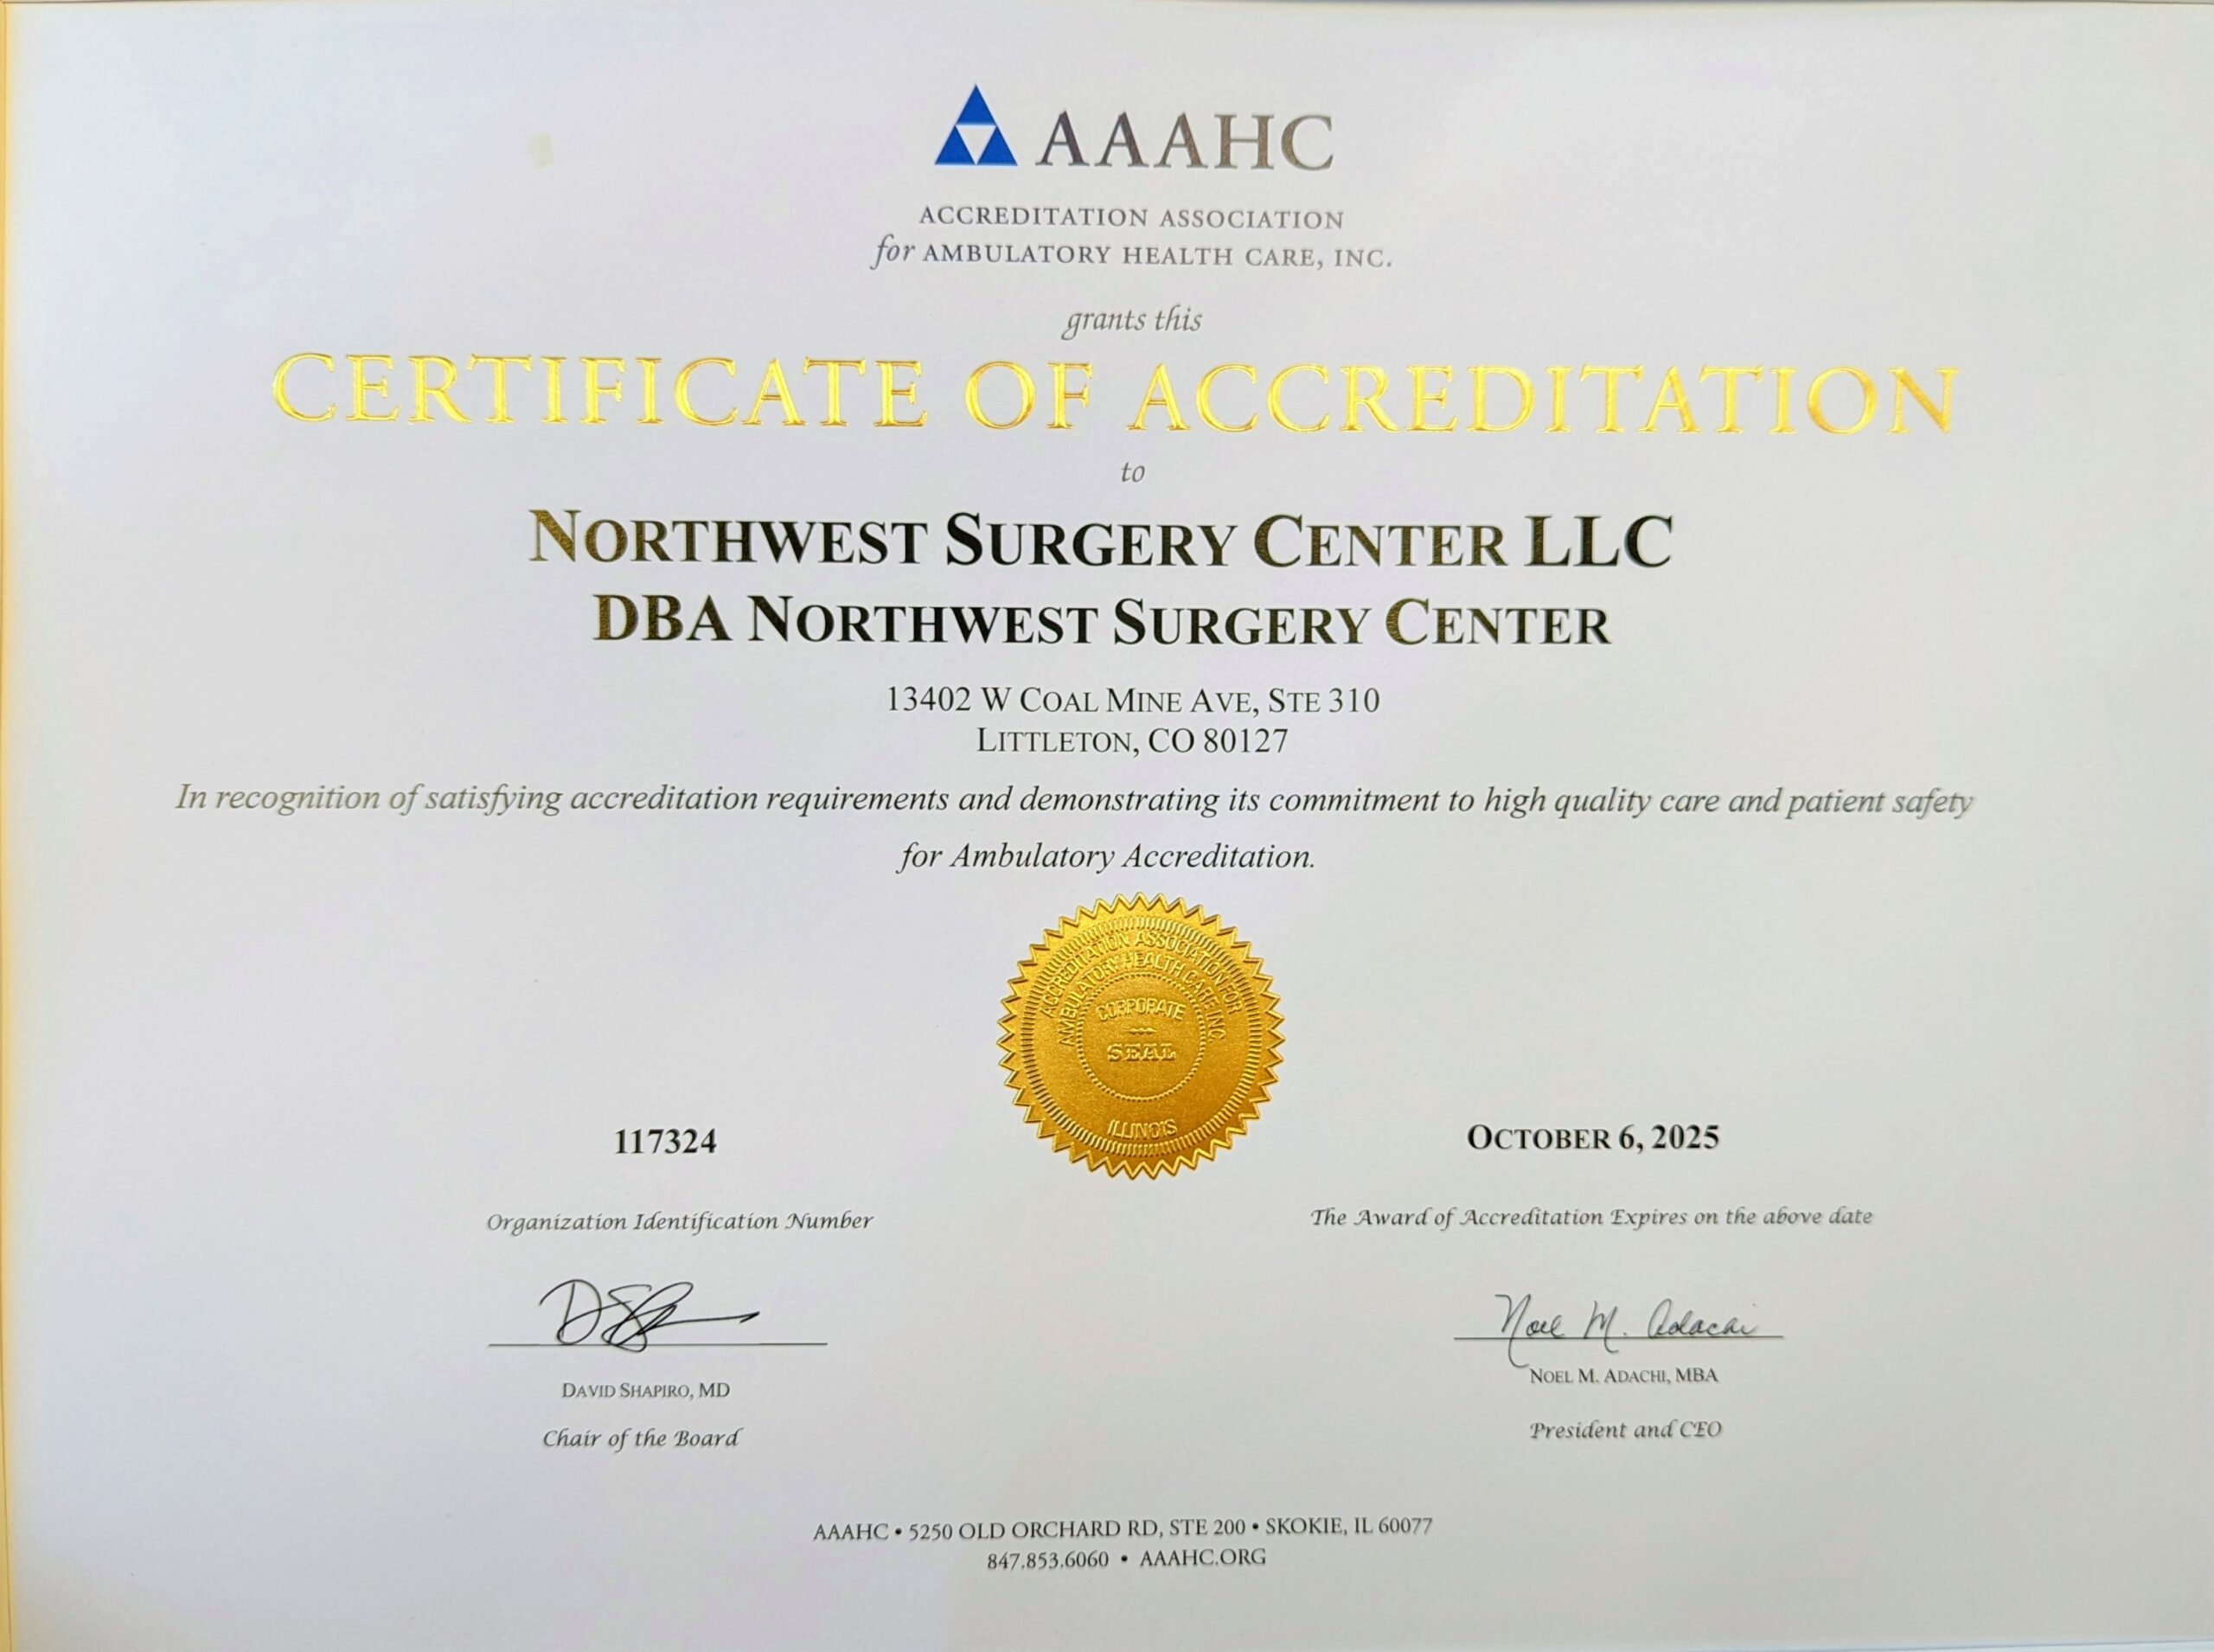 AAAHC Accreditation Achieved by the Bunion Cure!